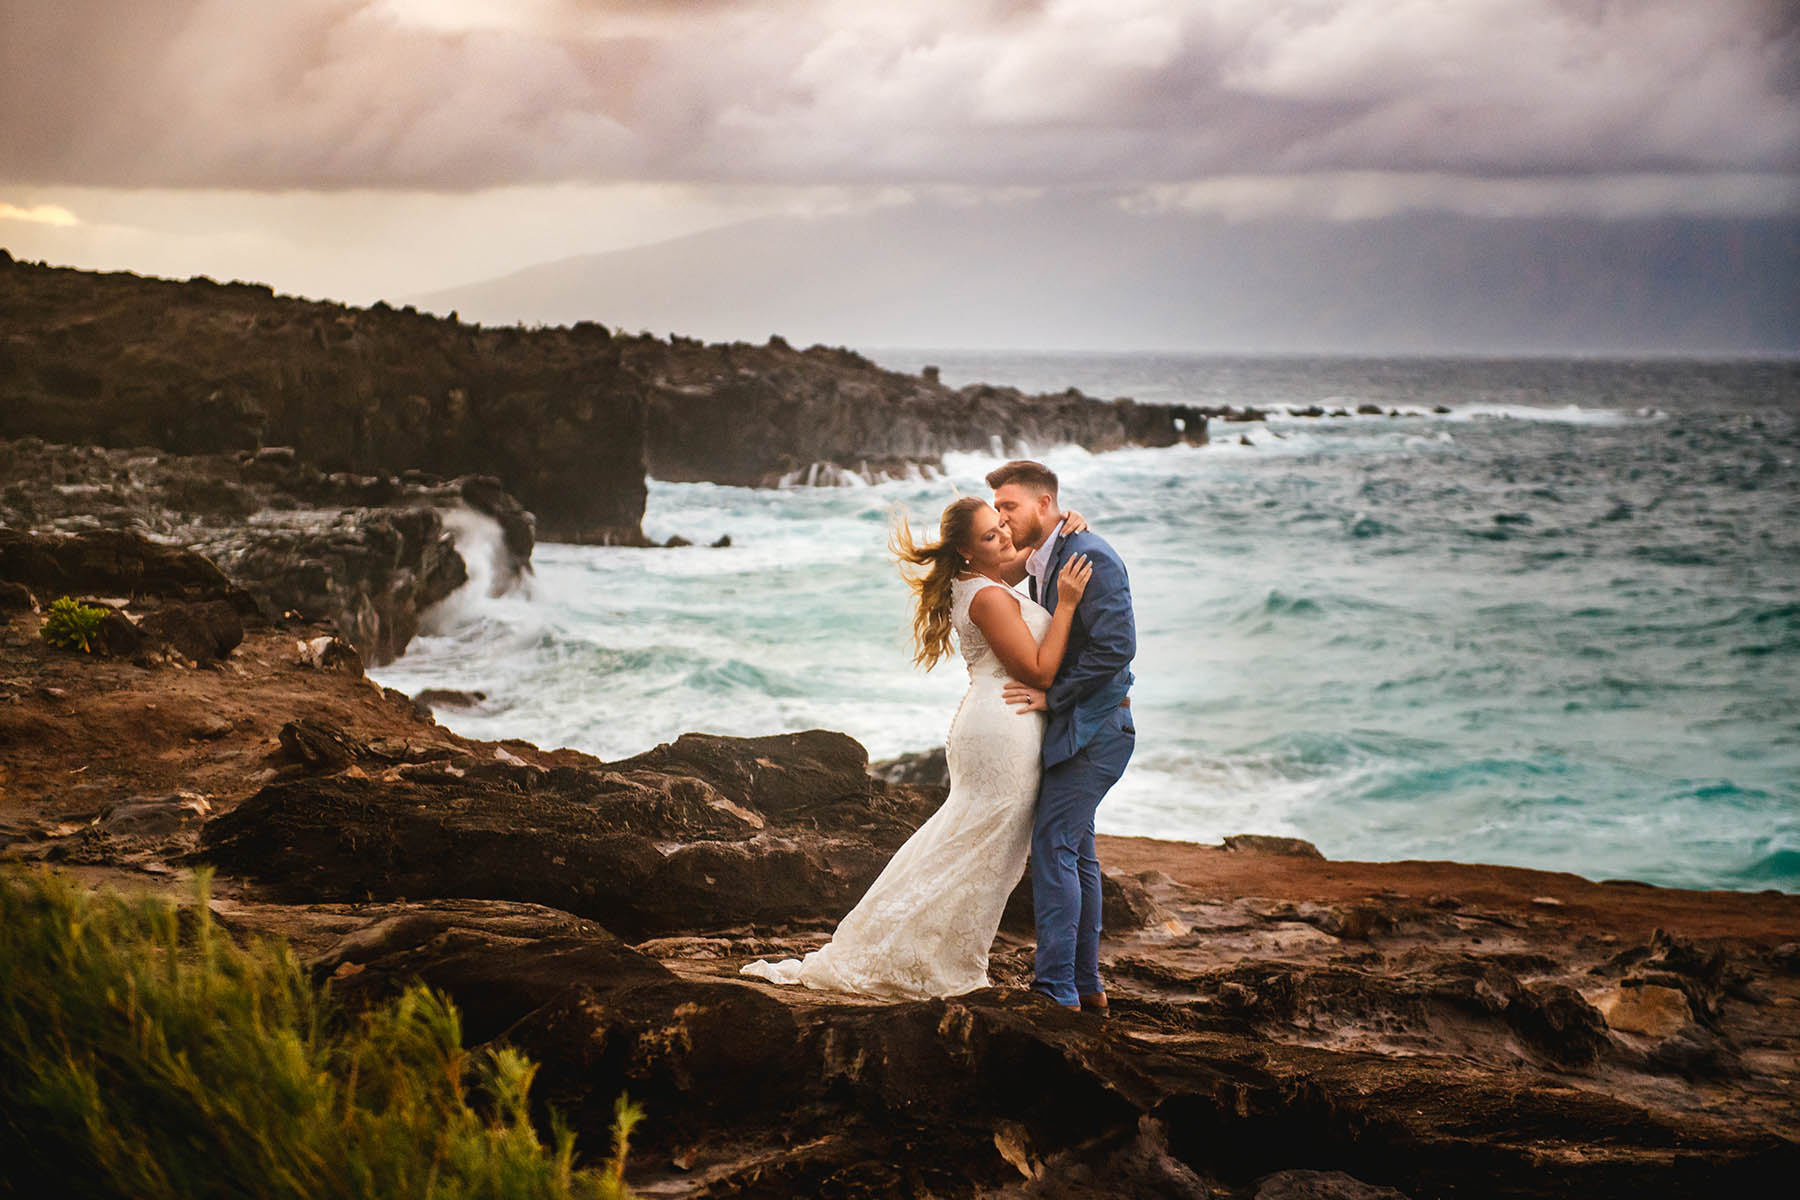 Best beach to get married in Maui